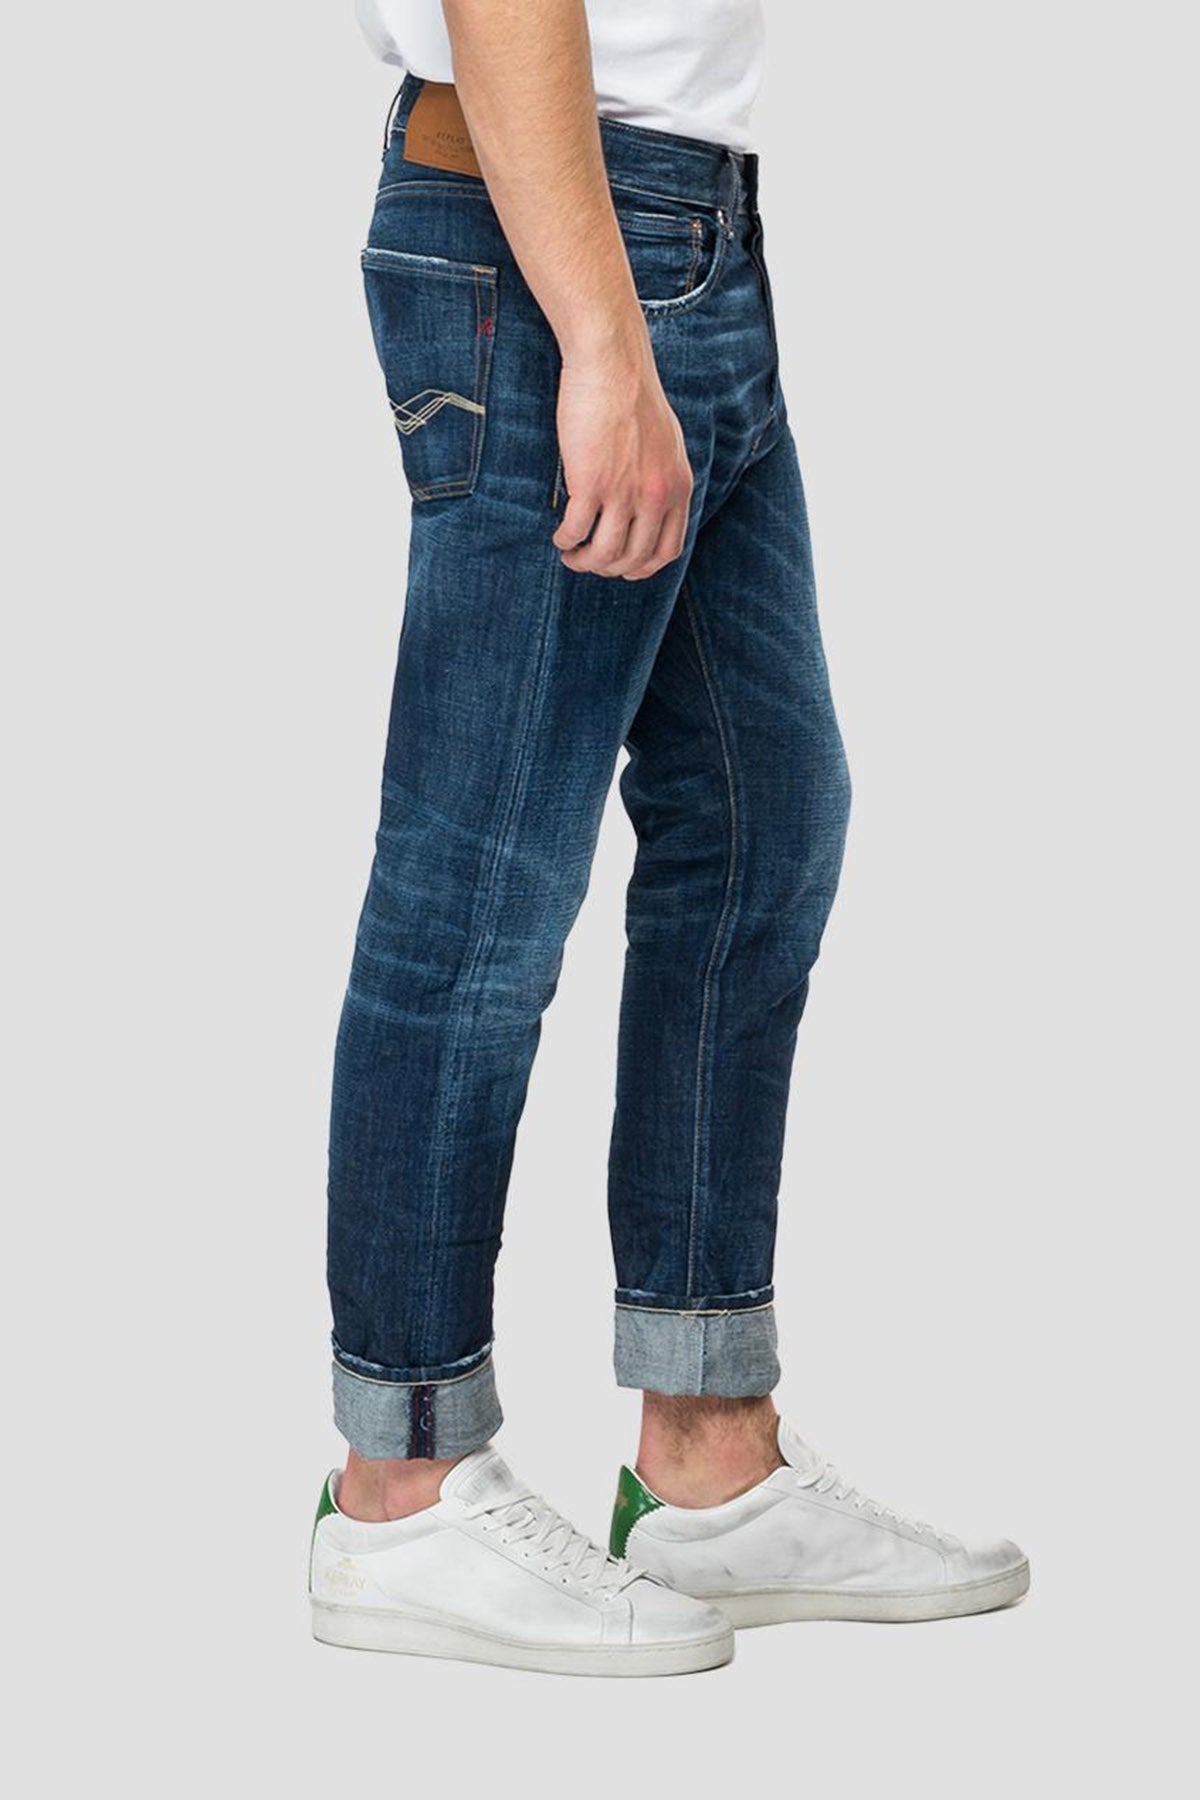 Replay Tinmar Tapered Fit Jeans-Libas Trendy Fashion Store